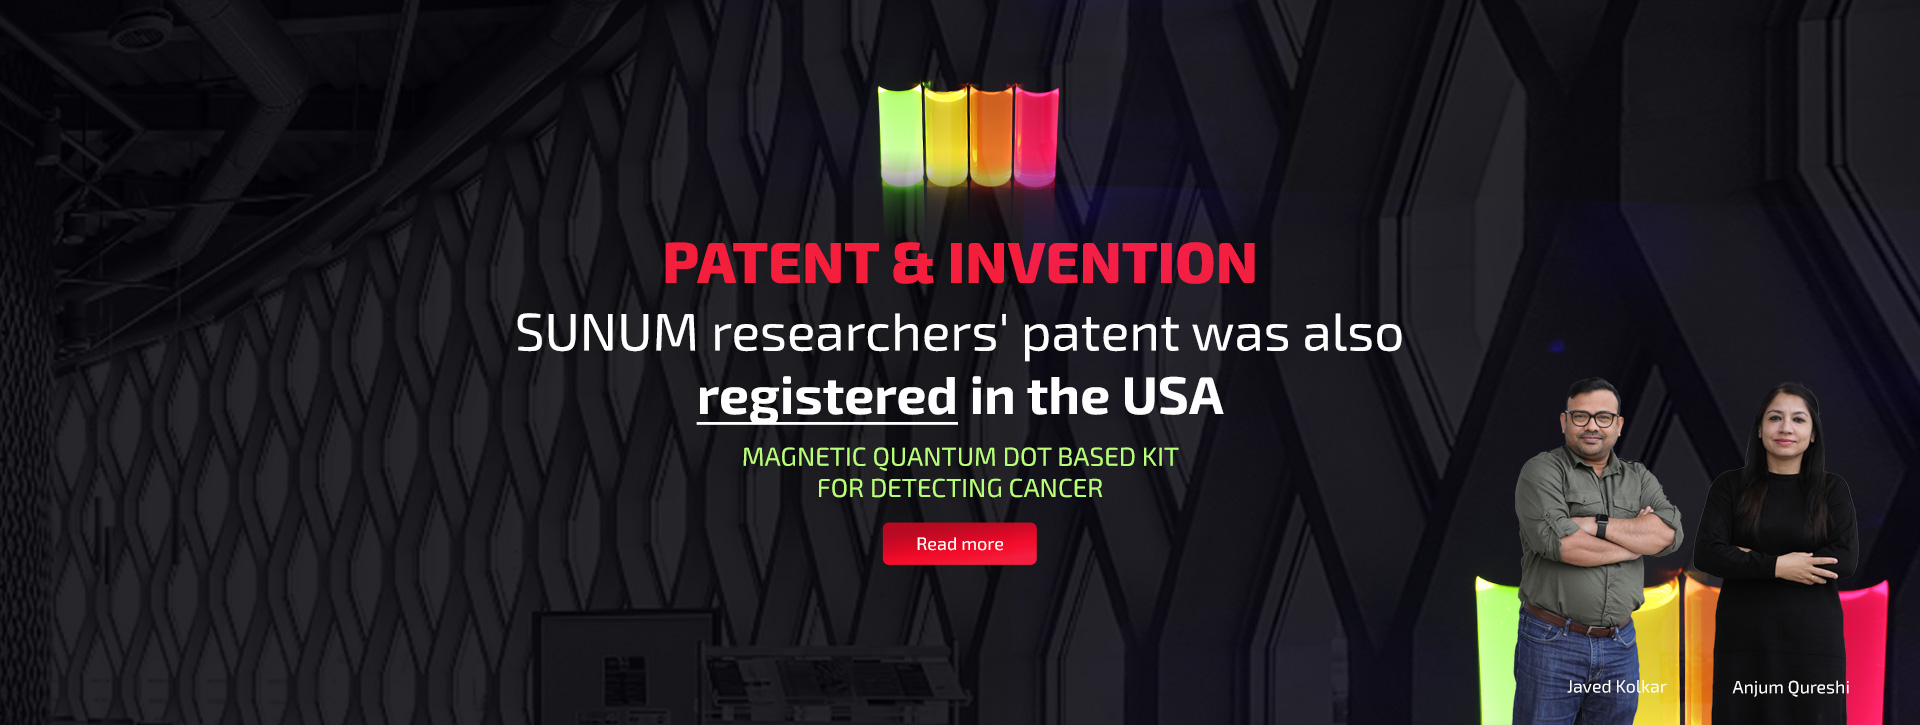 SUNUM researchers' patent was also registered in the USA